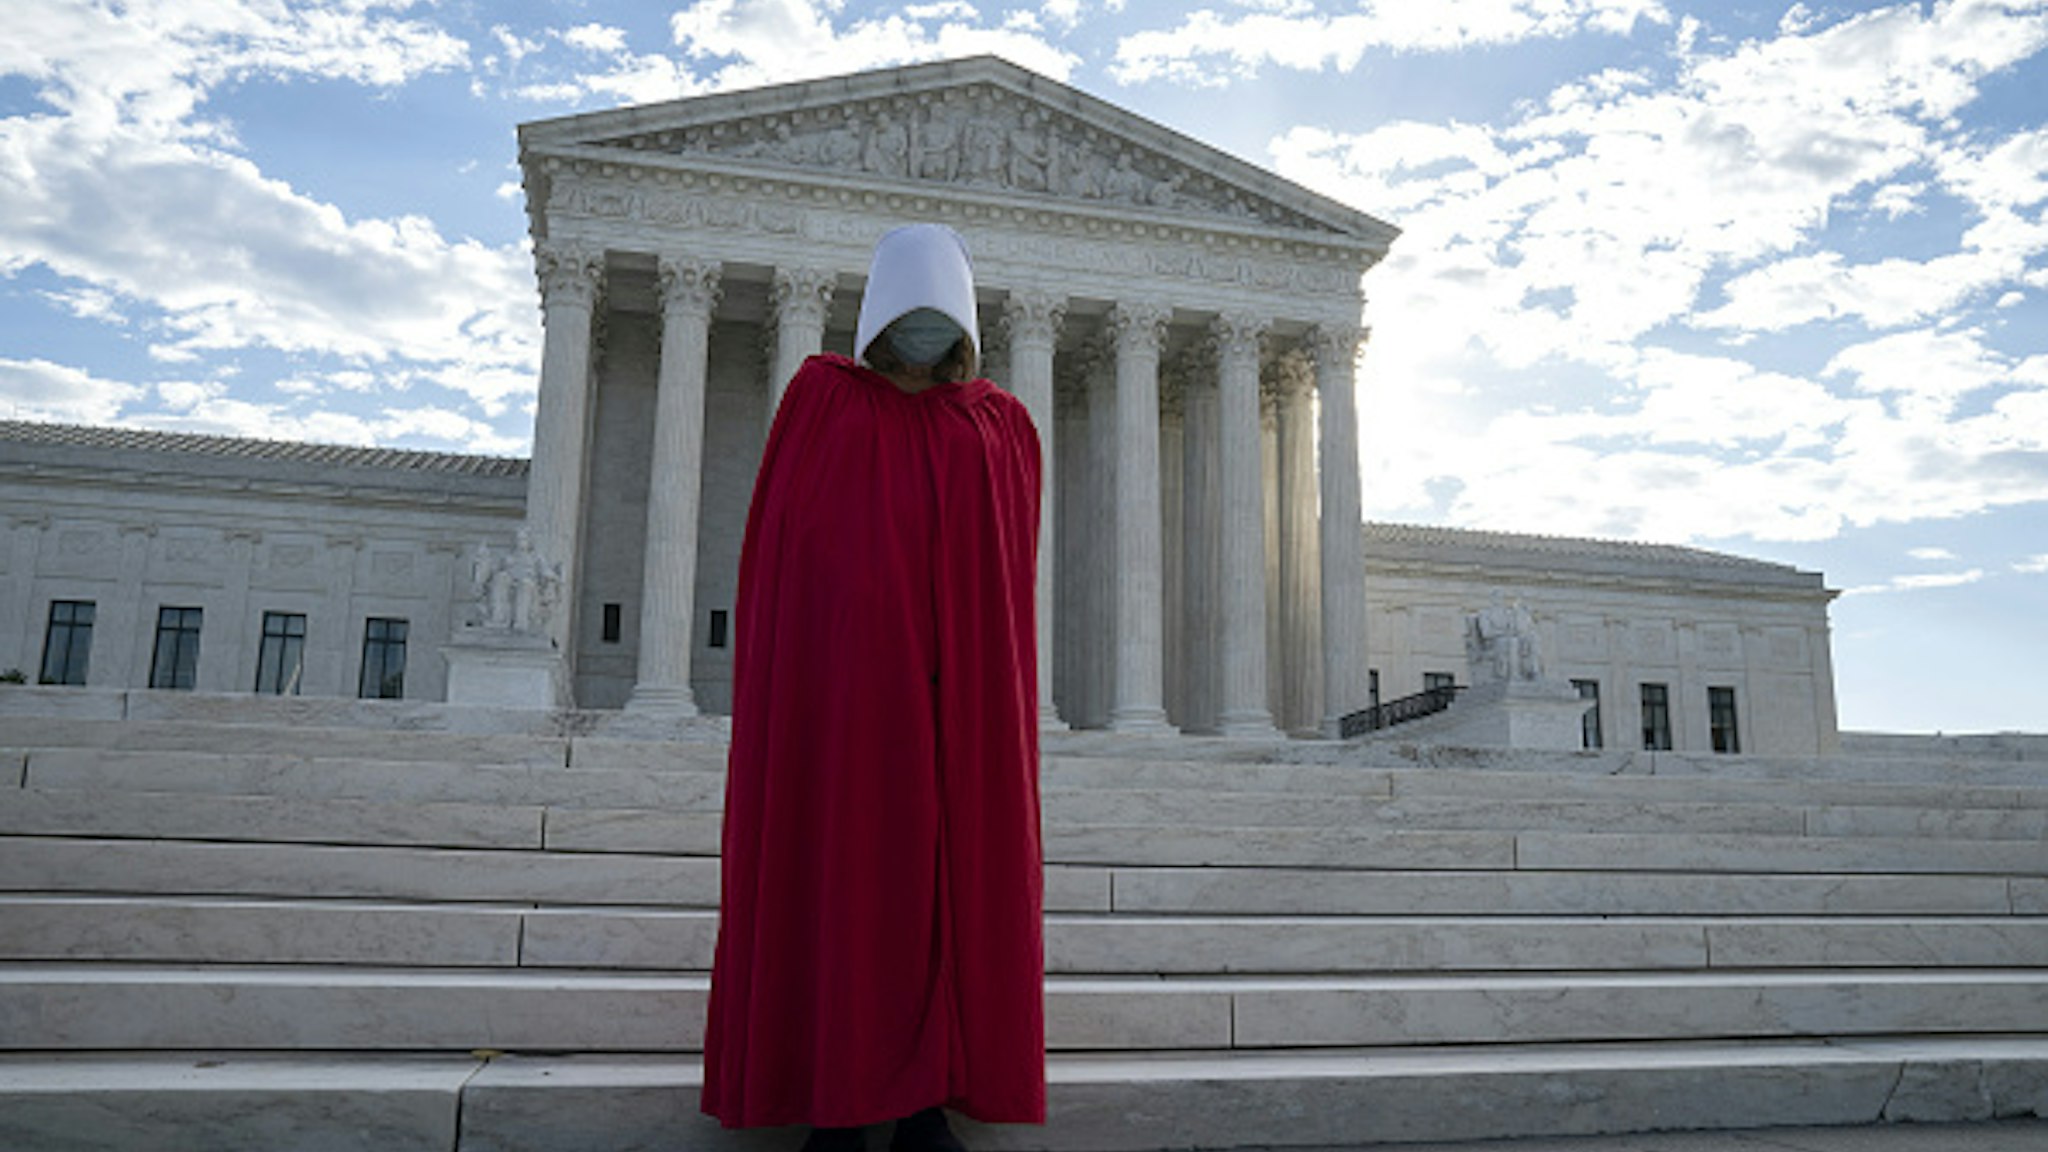 A demonstrator dressed as a character from The Handmaid's Tale stands outside the U.S. Supreme Court as Amy Coney Barrett, U.S. President Donald Trump's nominee for associate justice of the U.S. Supreme Court, meets with Senators at the U.S. Capitol in Washington, D.C., U.S., on Thursday, Oct. 1, 2020. A bruising Senate confirmation fight over Trump's Supreme Court choice may seal the fates of several incumbent senators in the November election, though it has yet to drastically alter the odds for which party will control the chamber.